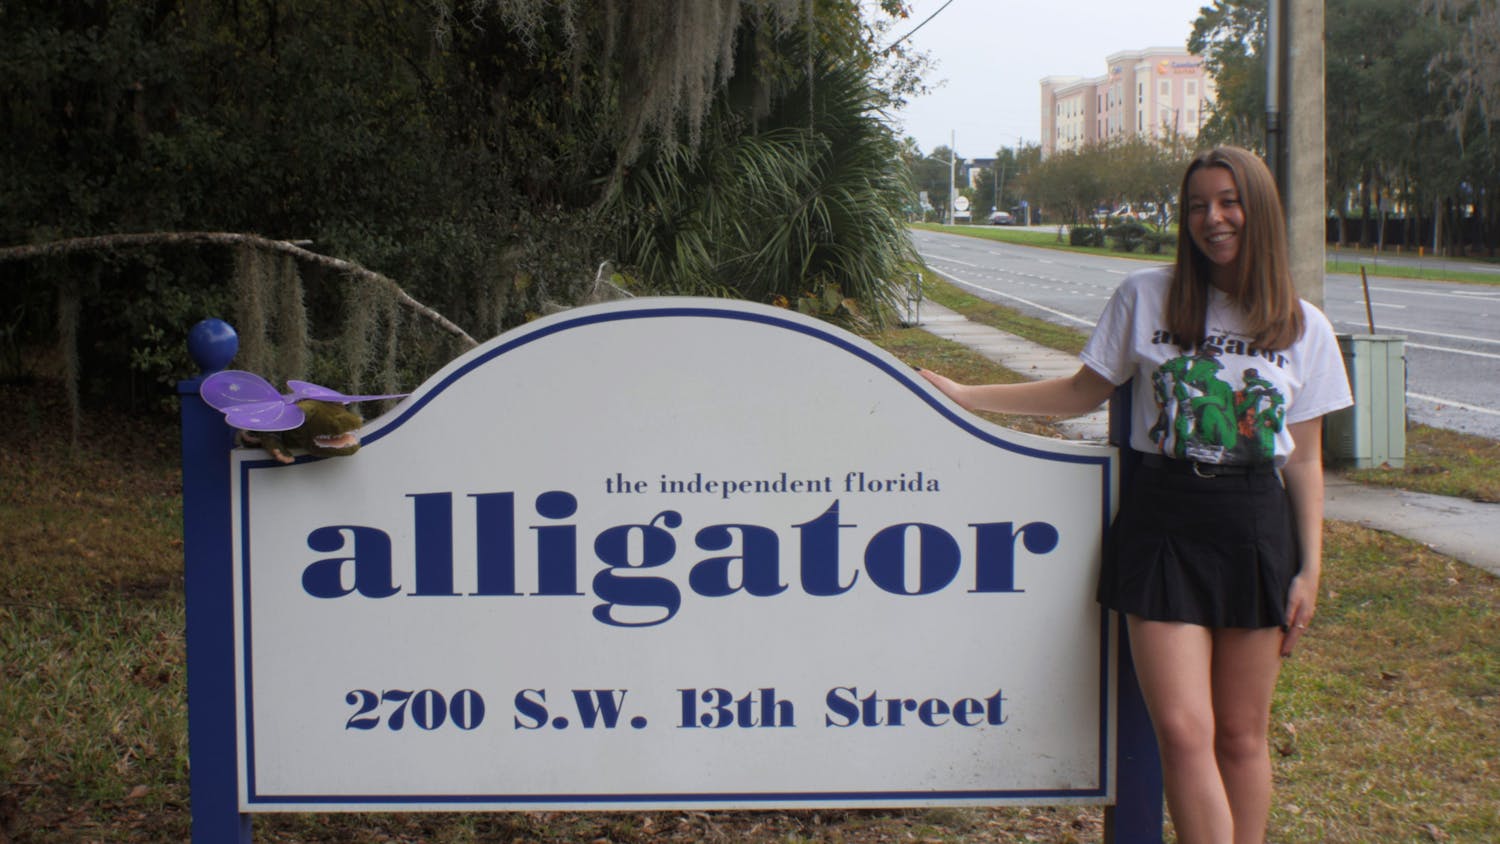 Lauren Whiddon was the Fall 2023 multimedia editor at The Independent Florida Alligator.